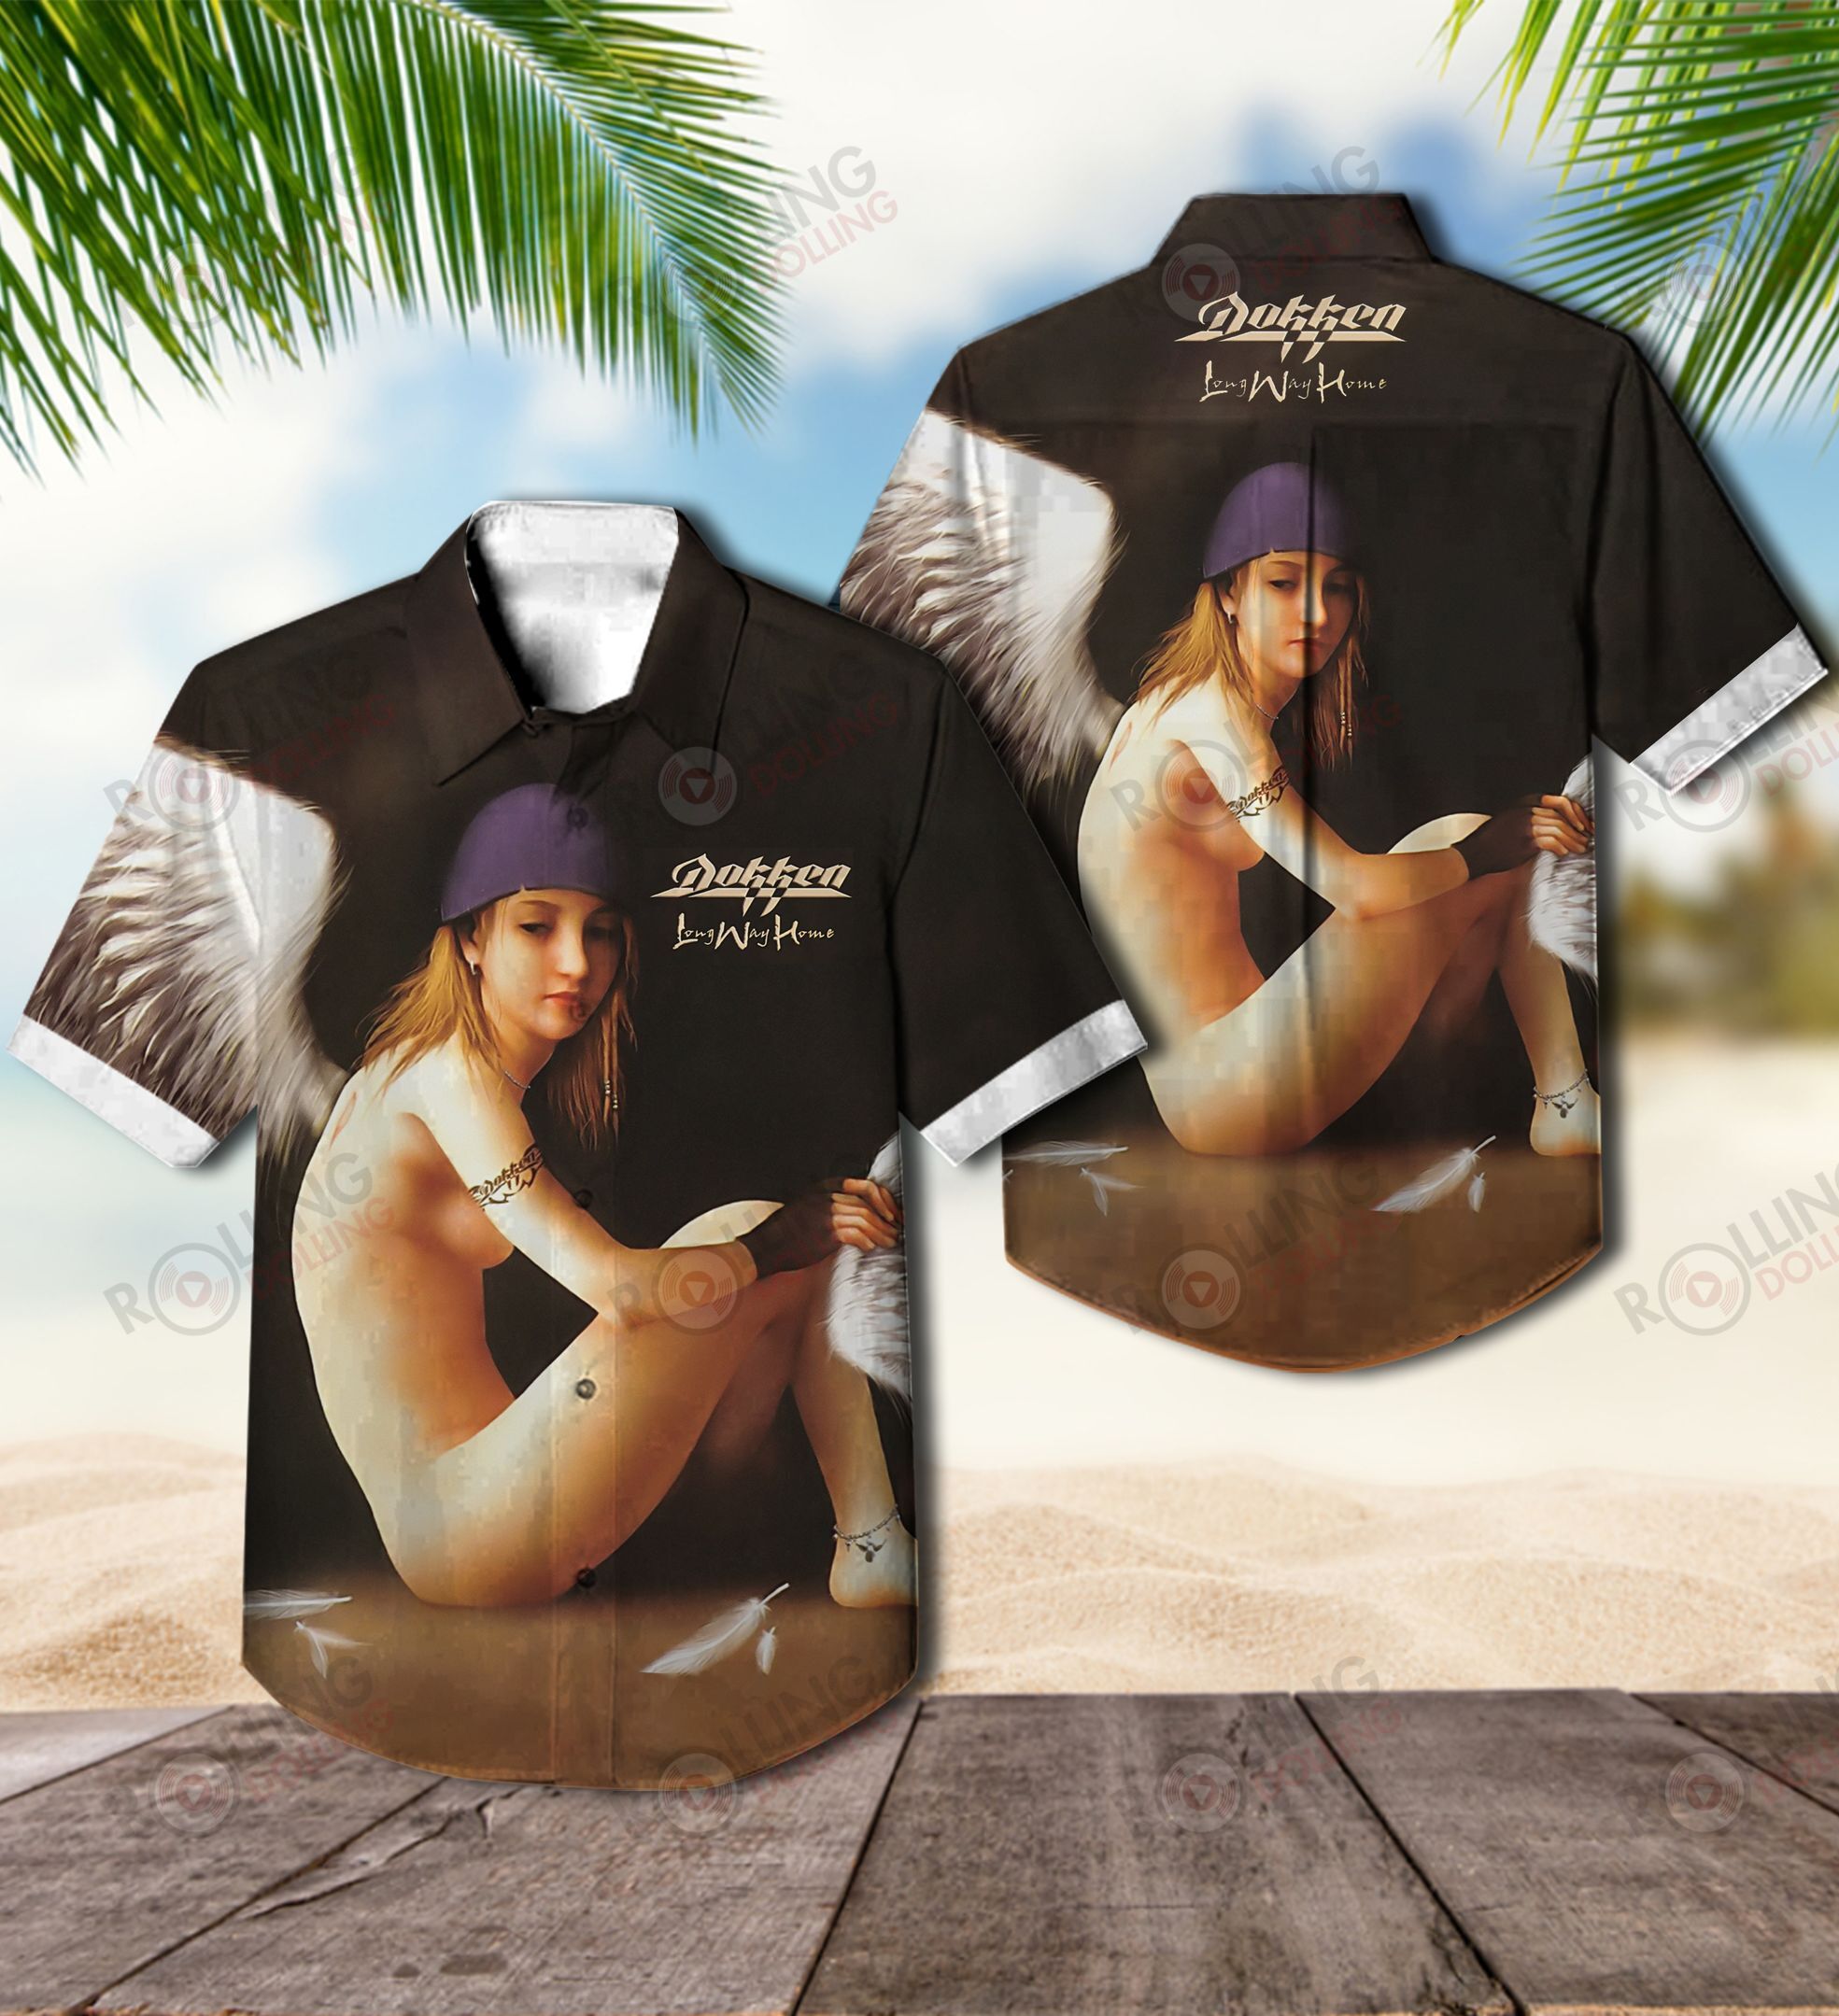 This would make a great gift for any fan who loves Hawaiian Shirt as well as Rock band 1